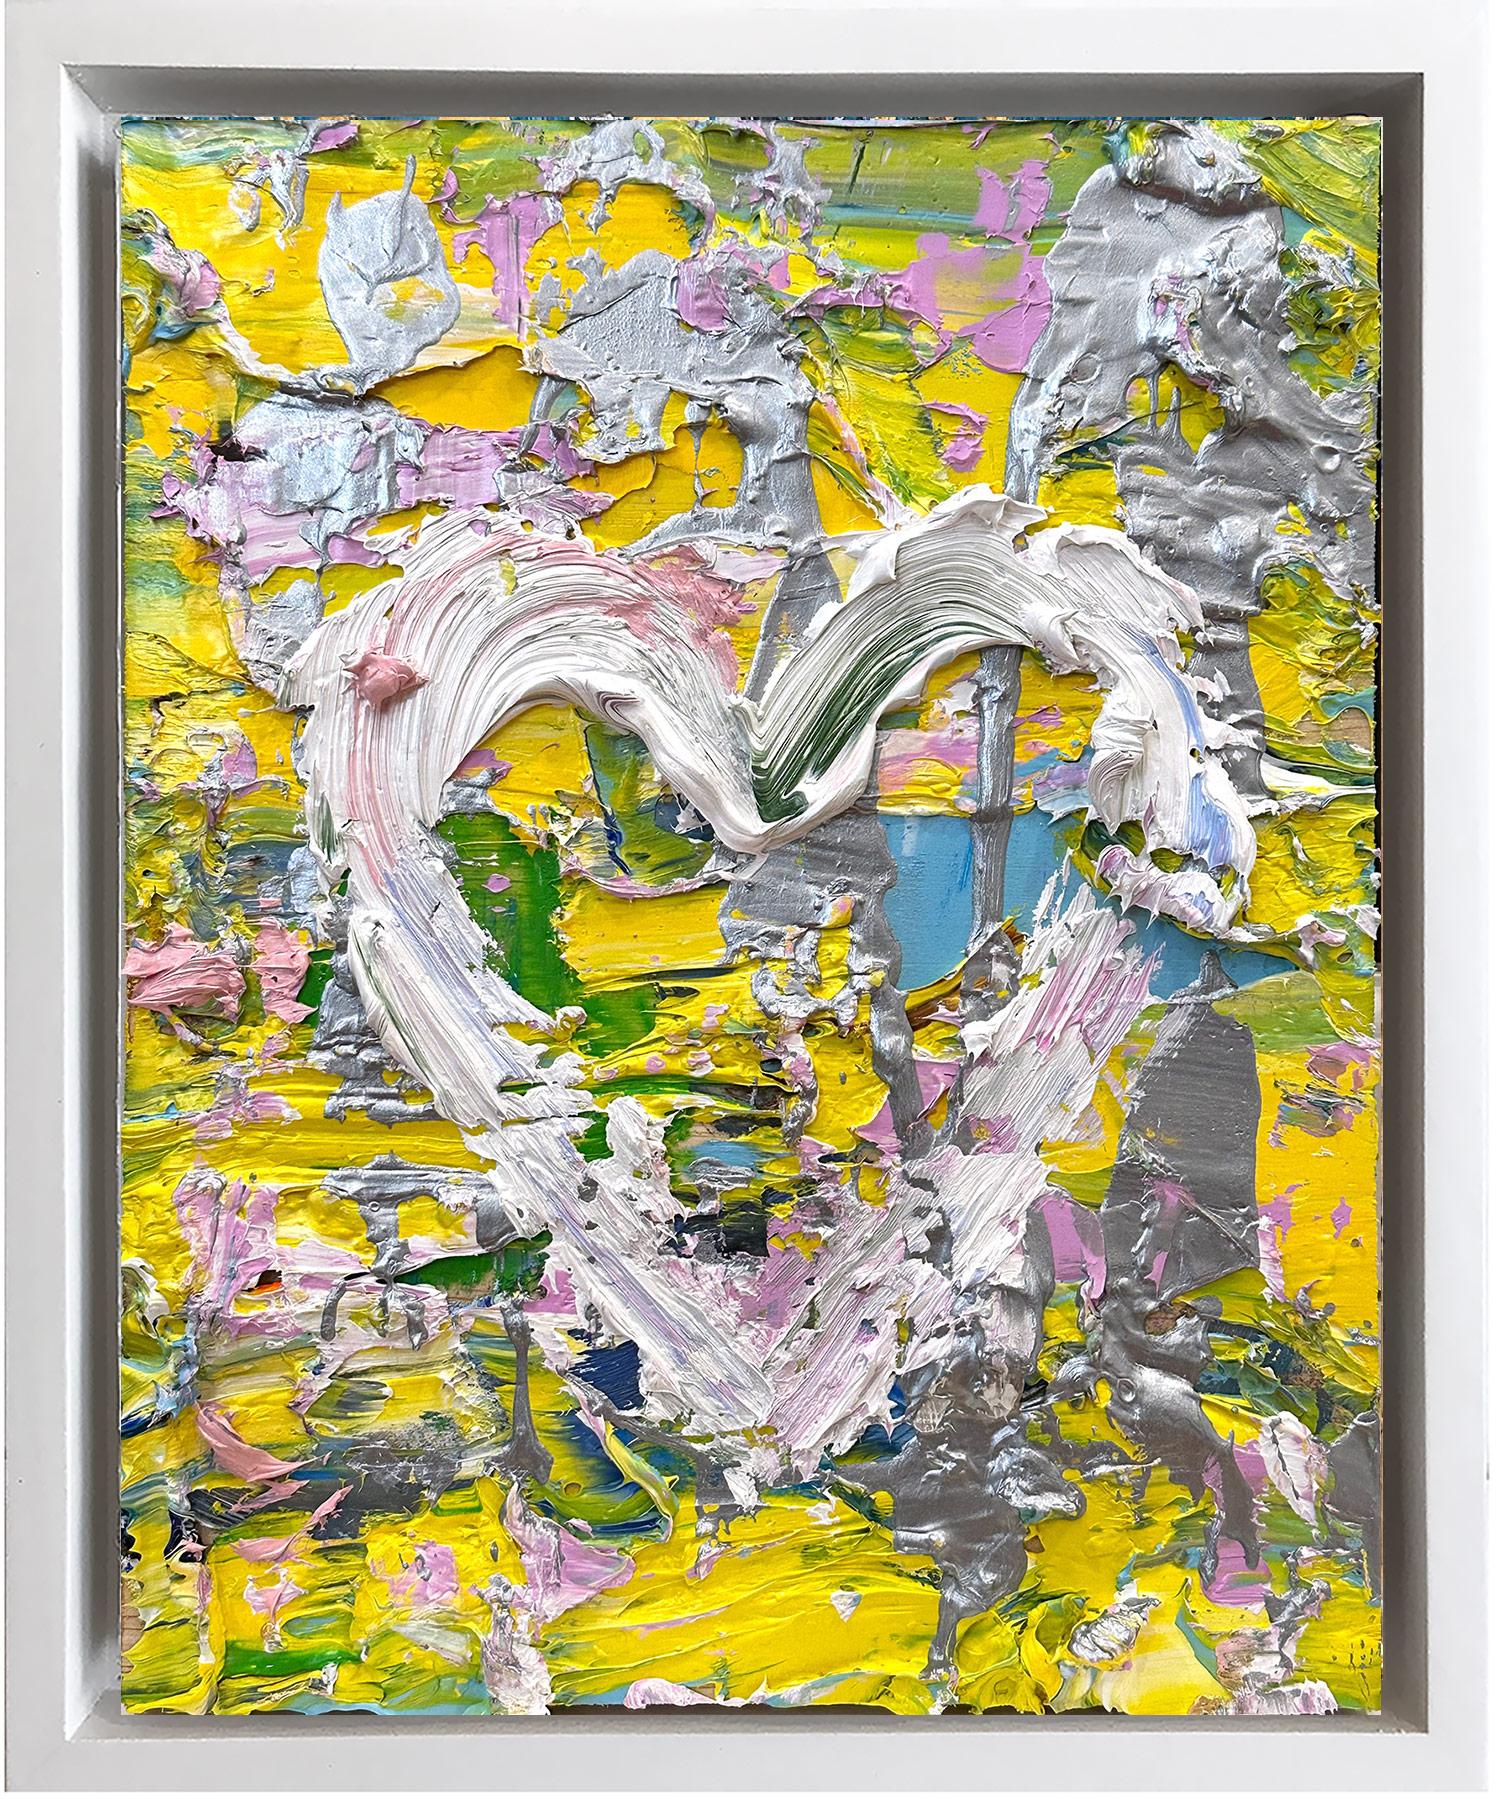 Cindy Shaoul Figurative Painting - "My Spring in Yves Saint Laurent Heart" Pop Art Oil Painting White Floater Frame